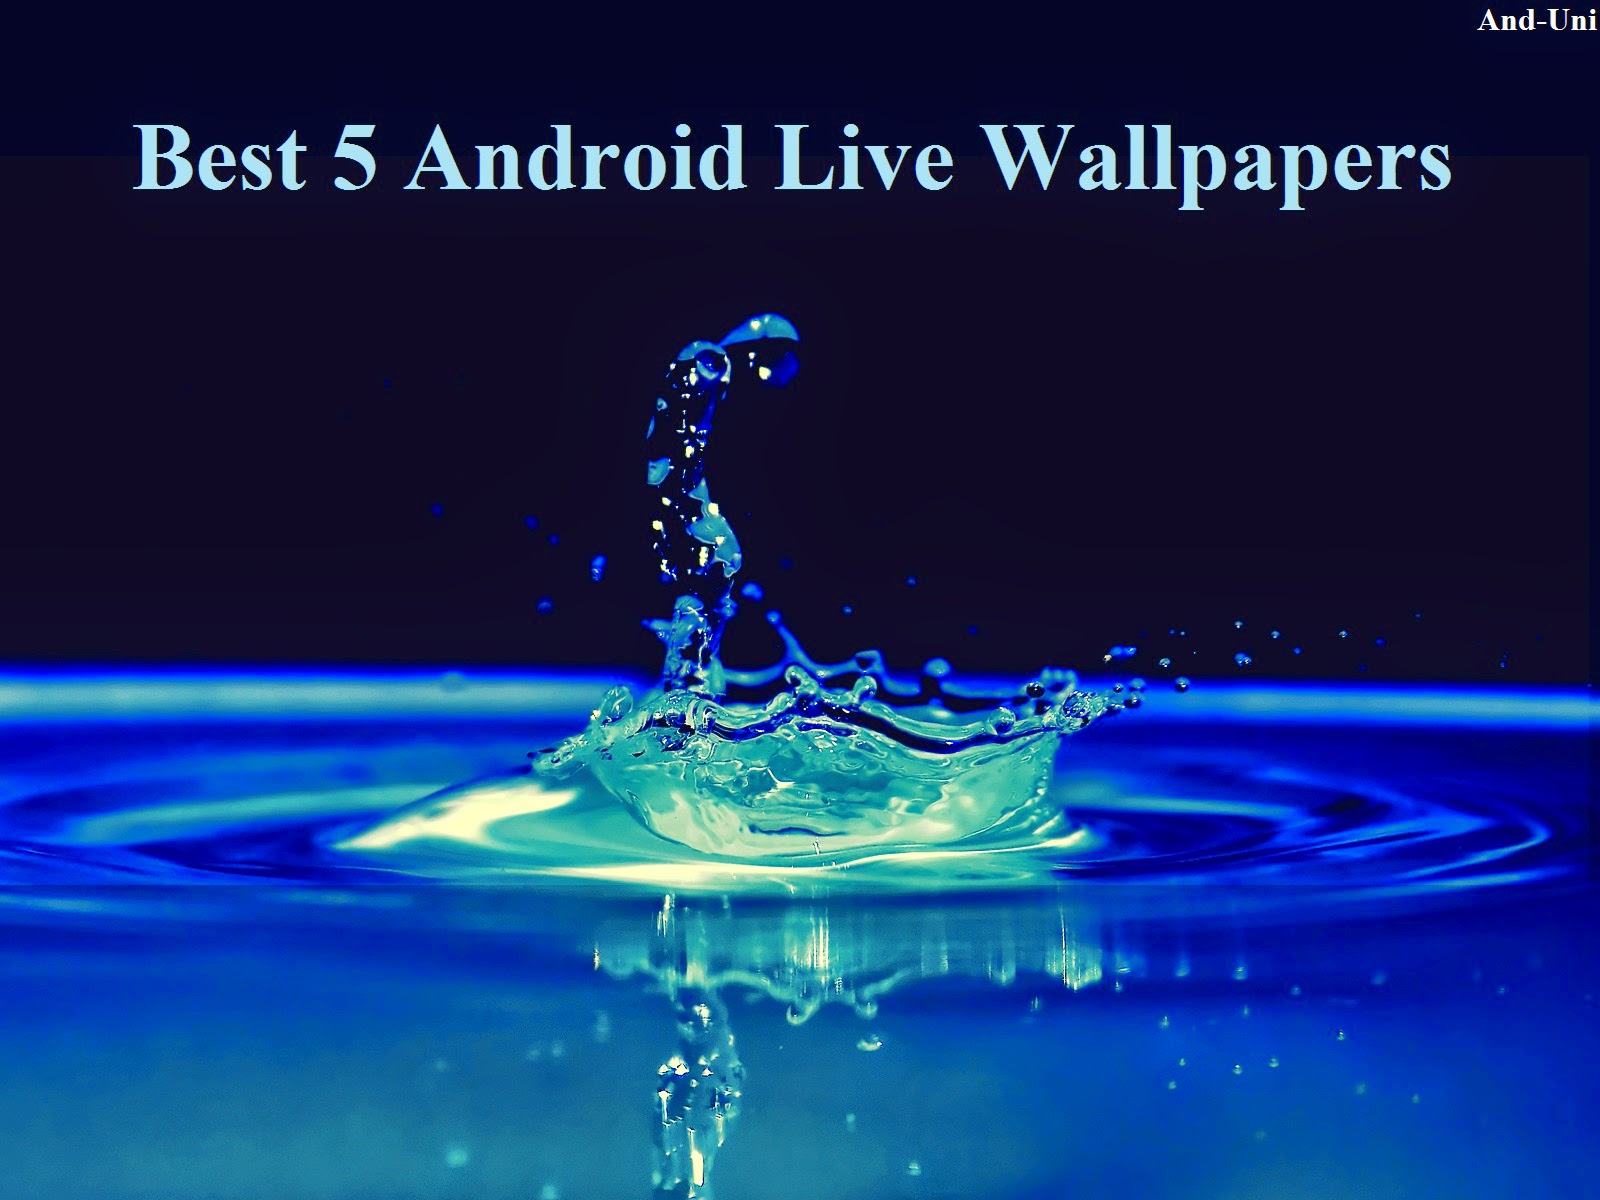 Best HD Live Wallpaper Of All Time For Android And Uni